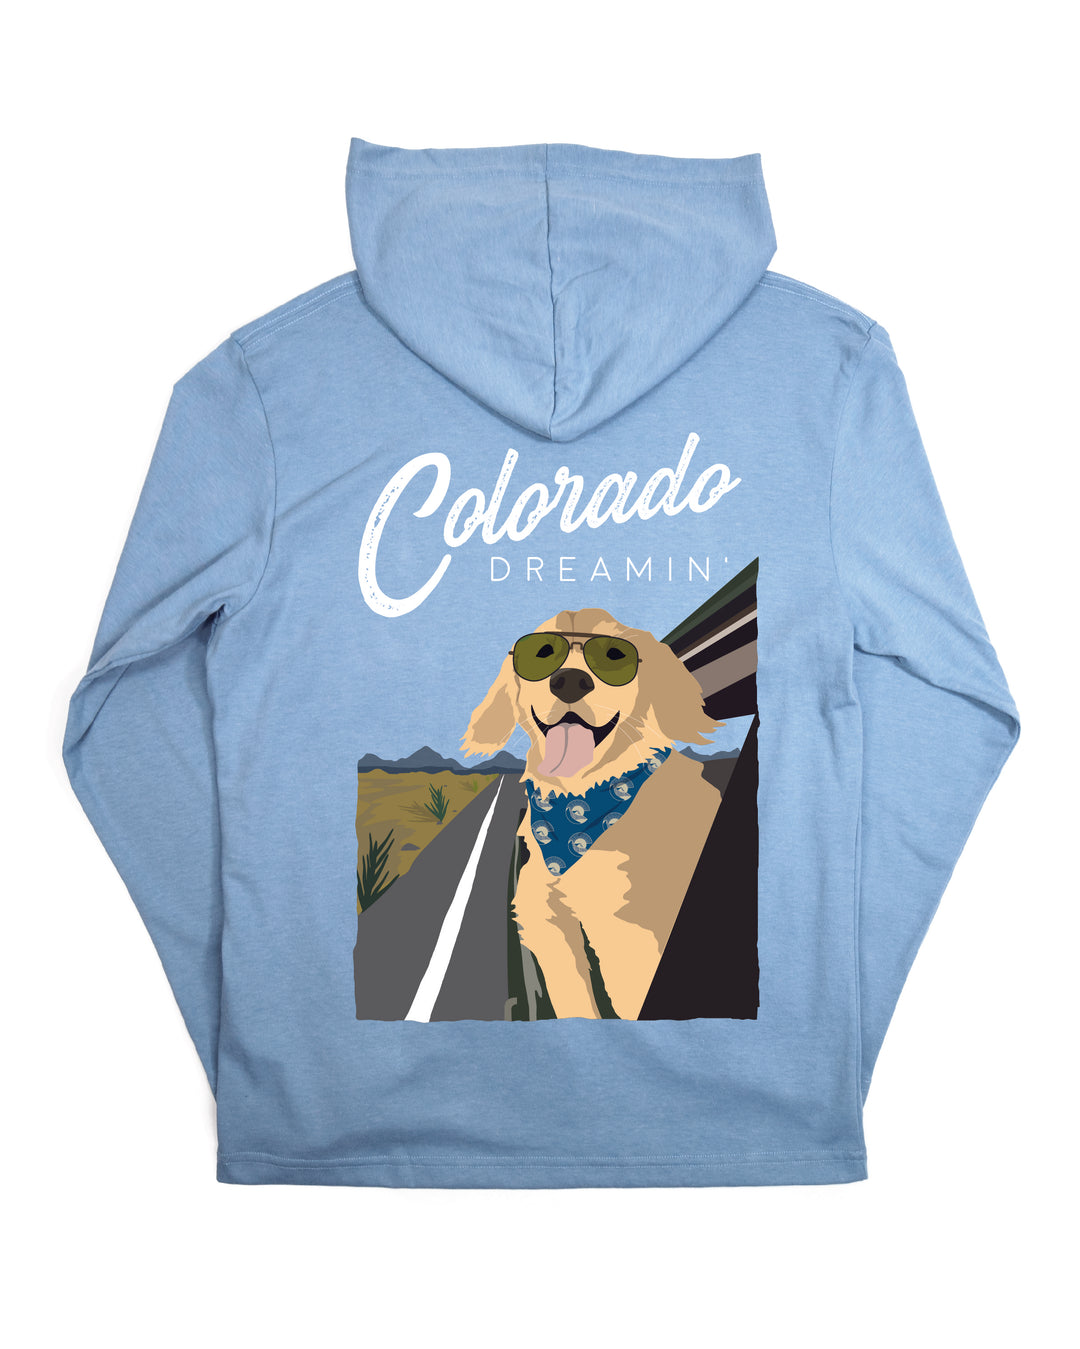 Dog On The Road Hooded Long Sleeve